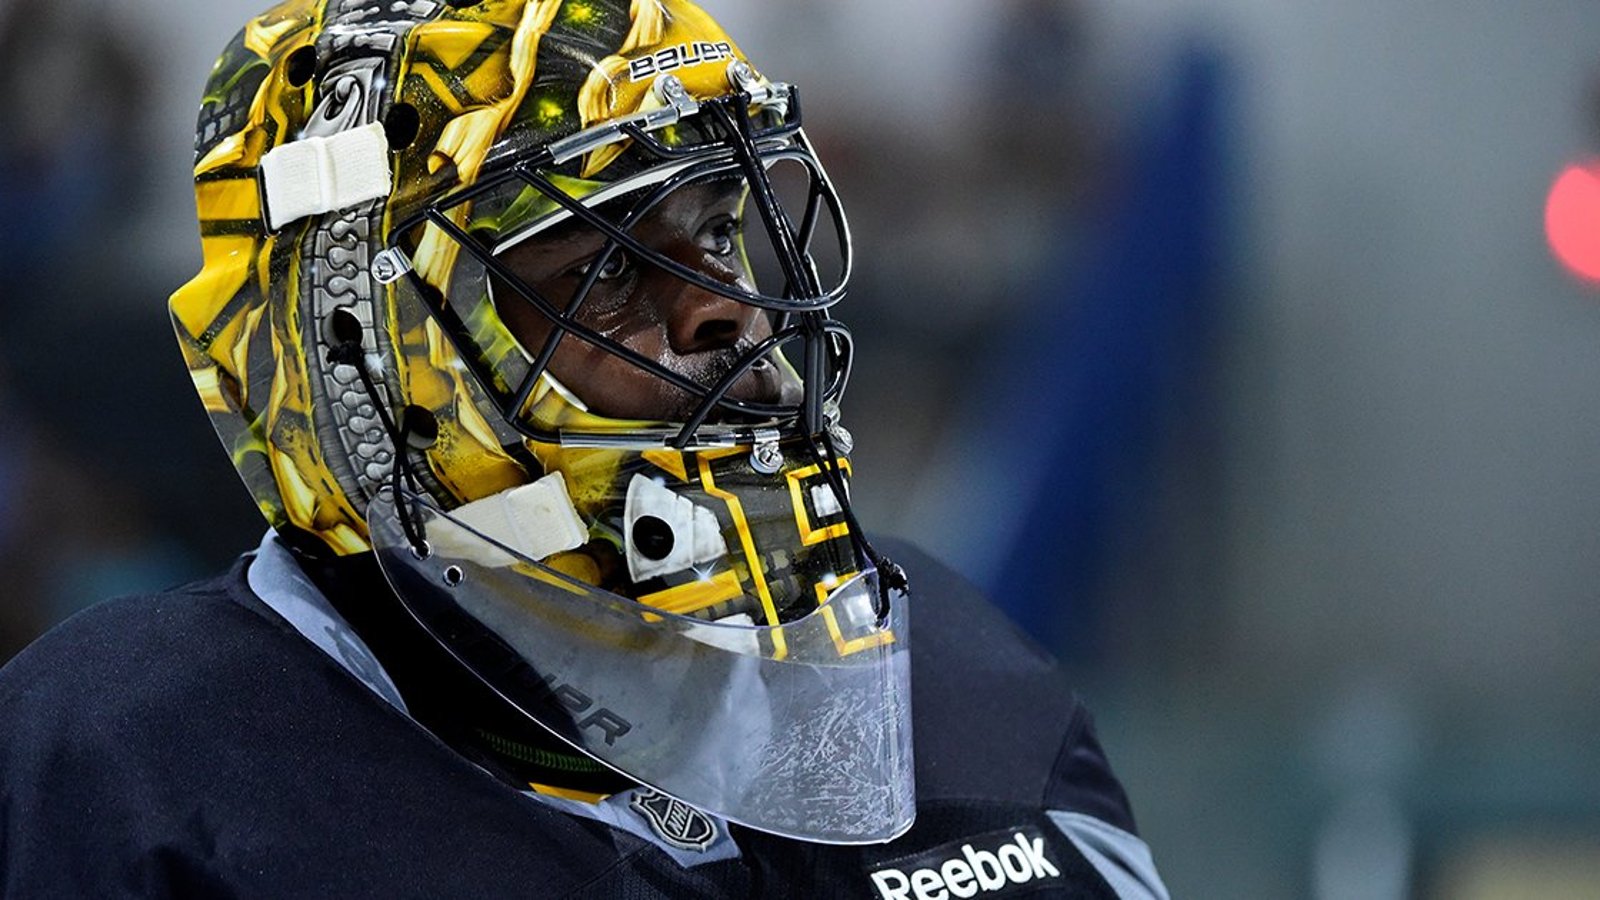 Breaking: Top prospect Subban claimed off waivers!